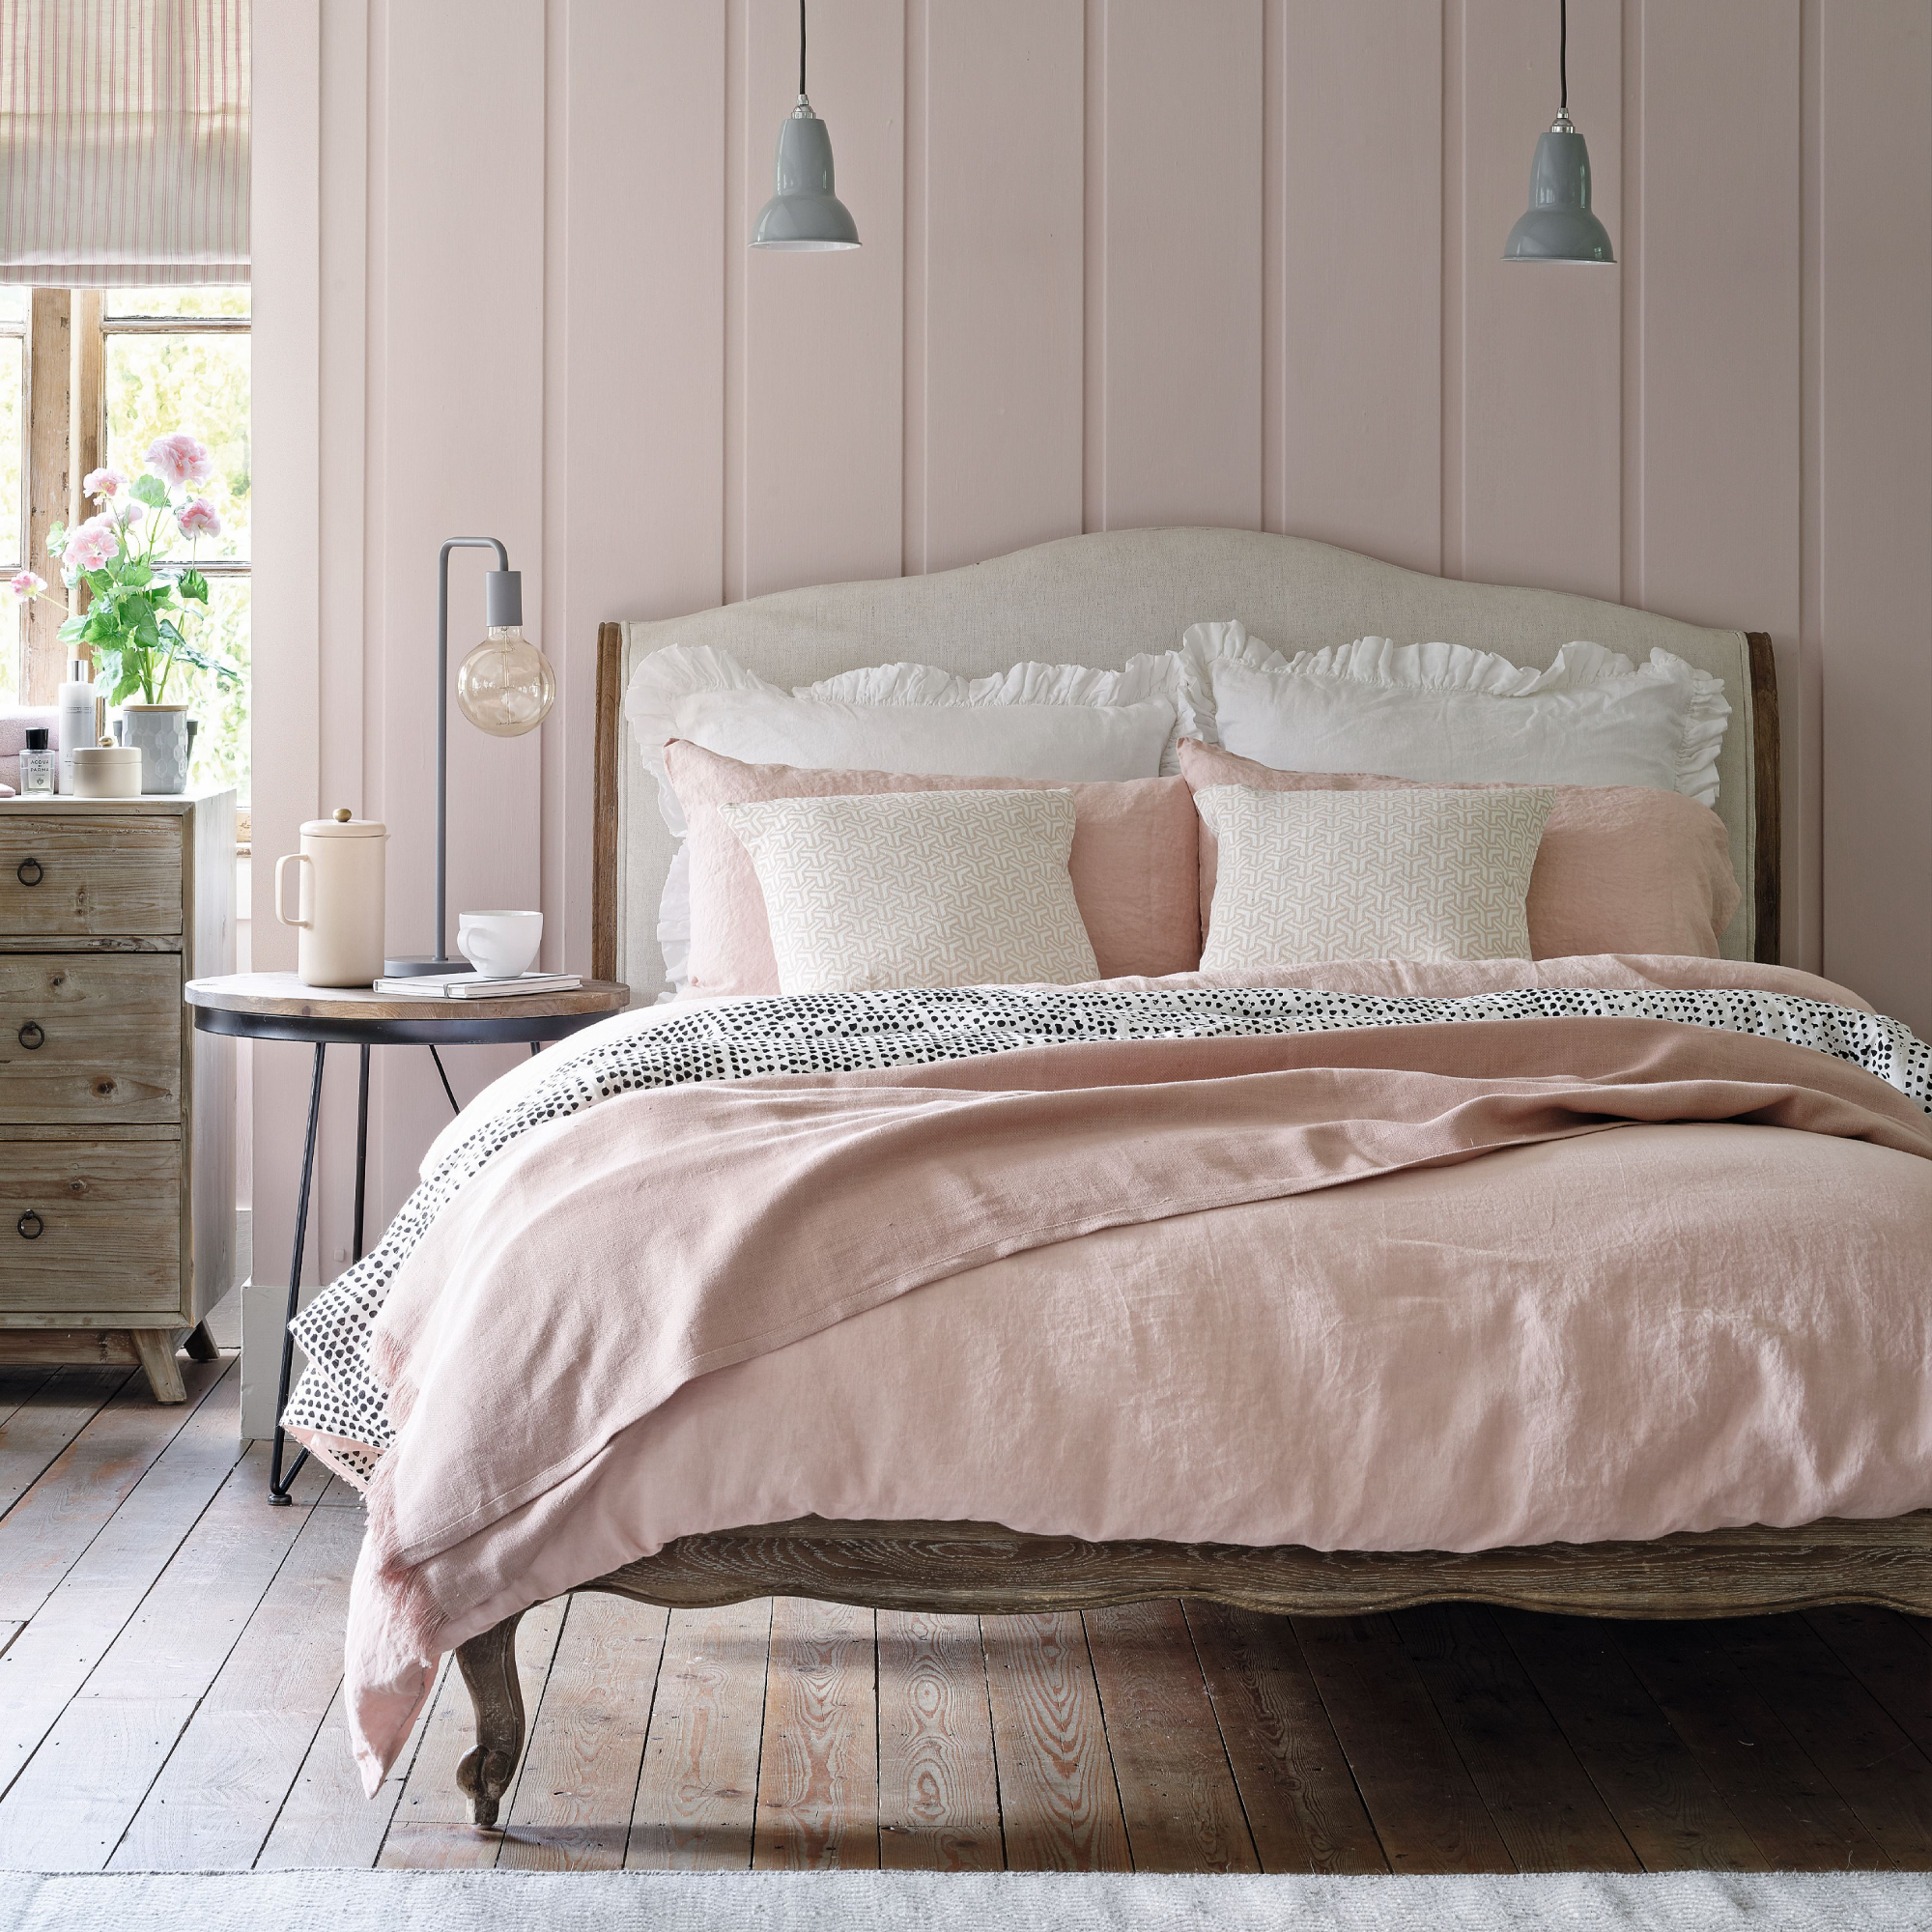 'I don't think they get talked about enough' – the underrated bedroom colour scheme Sophie Robinson loves